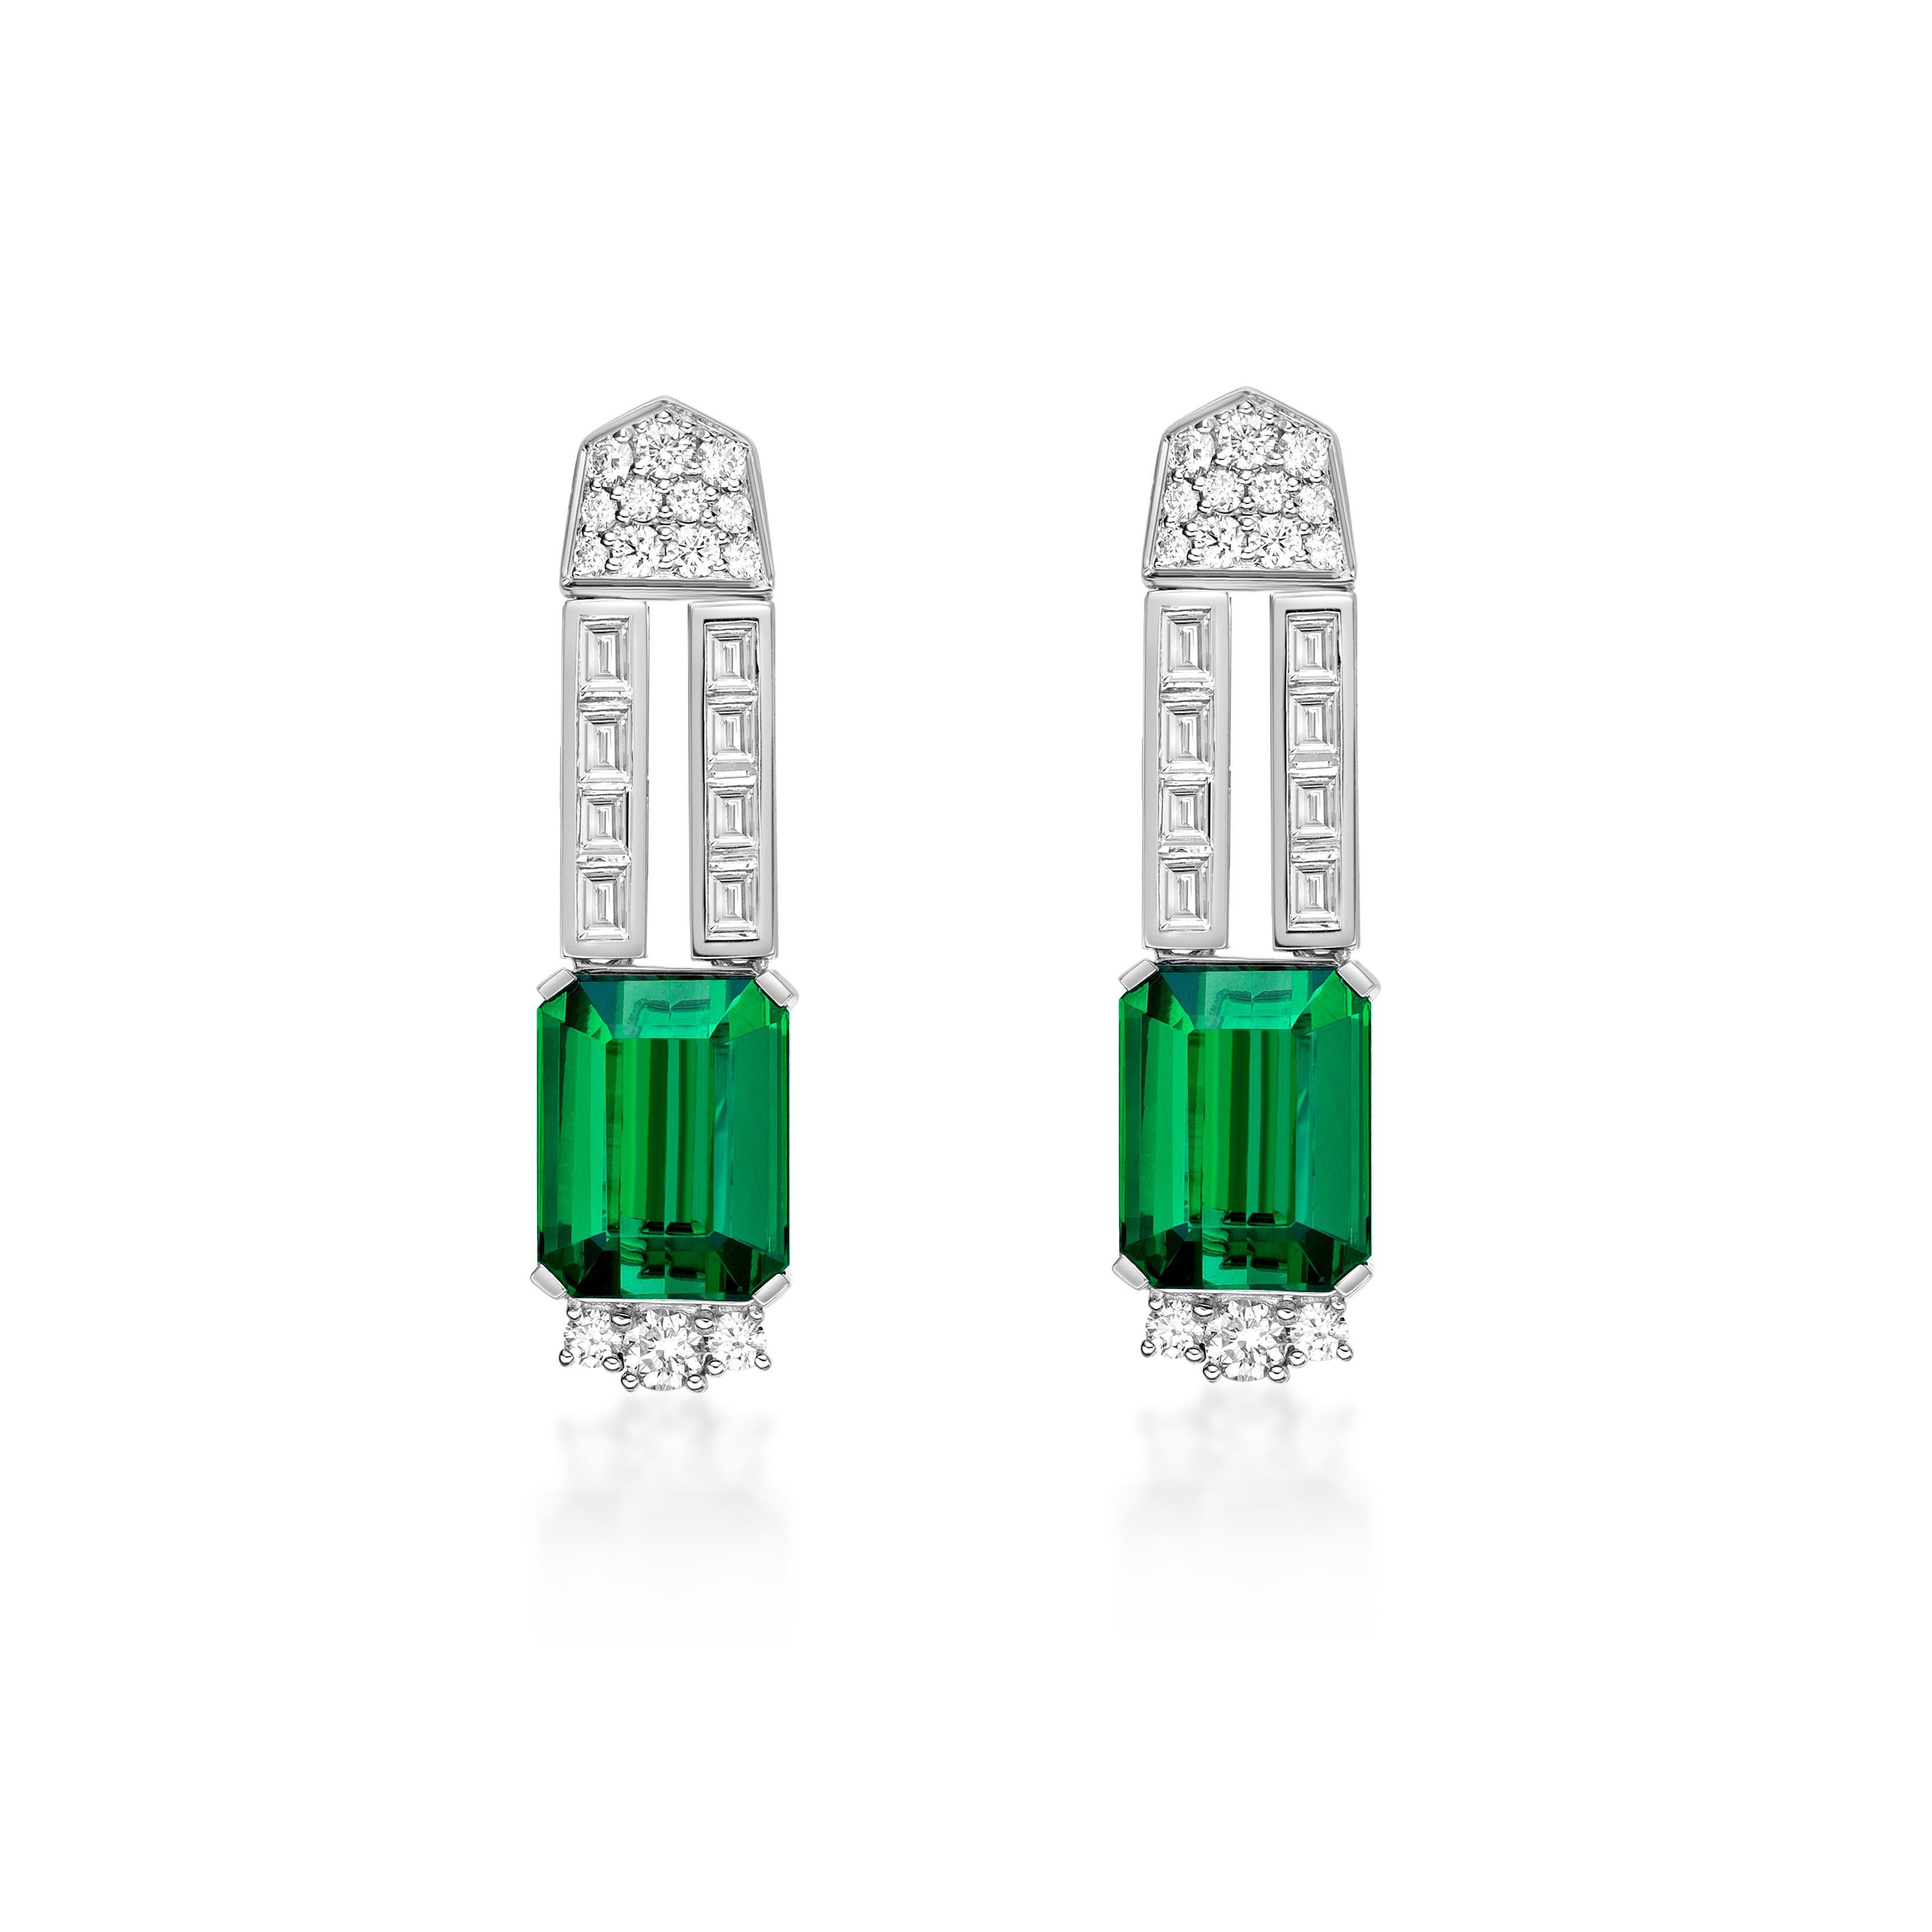 Contemporary 13.13 Carat Green Tourmaline Drop Earrings in 18Karat White Gold with Diamond. For Sale